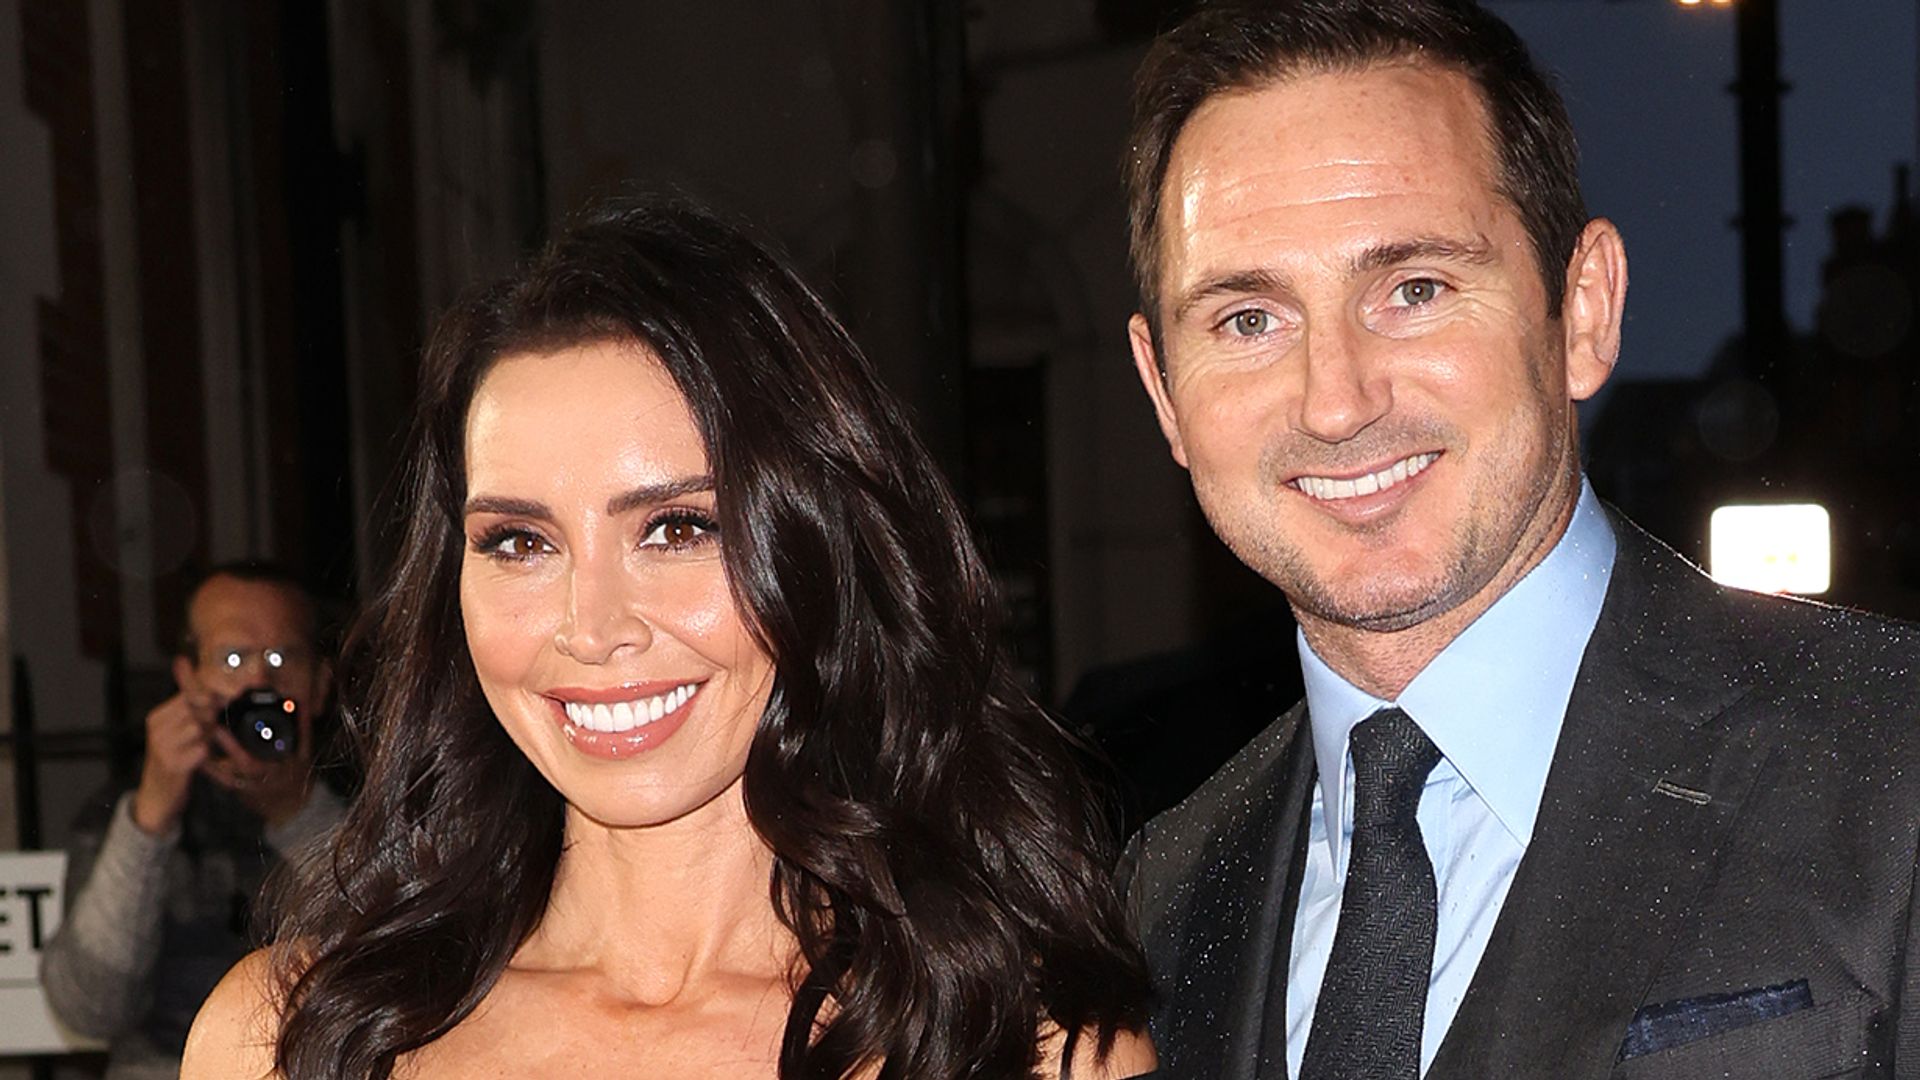 Christine in a black dress on the red carpet with Frank Lampard at Pride of Britain Awards